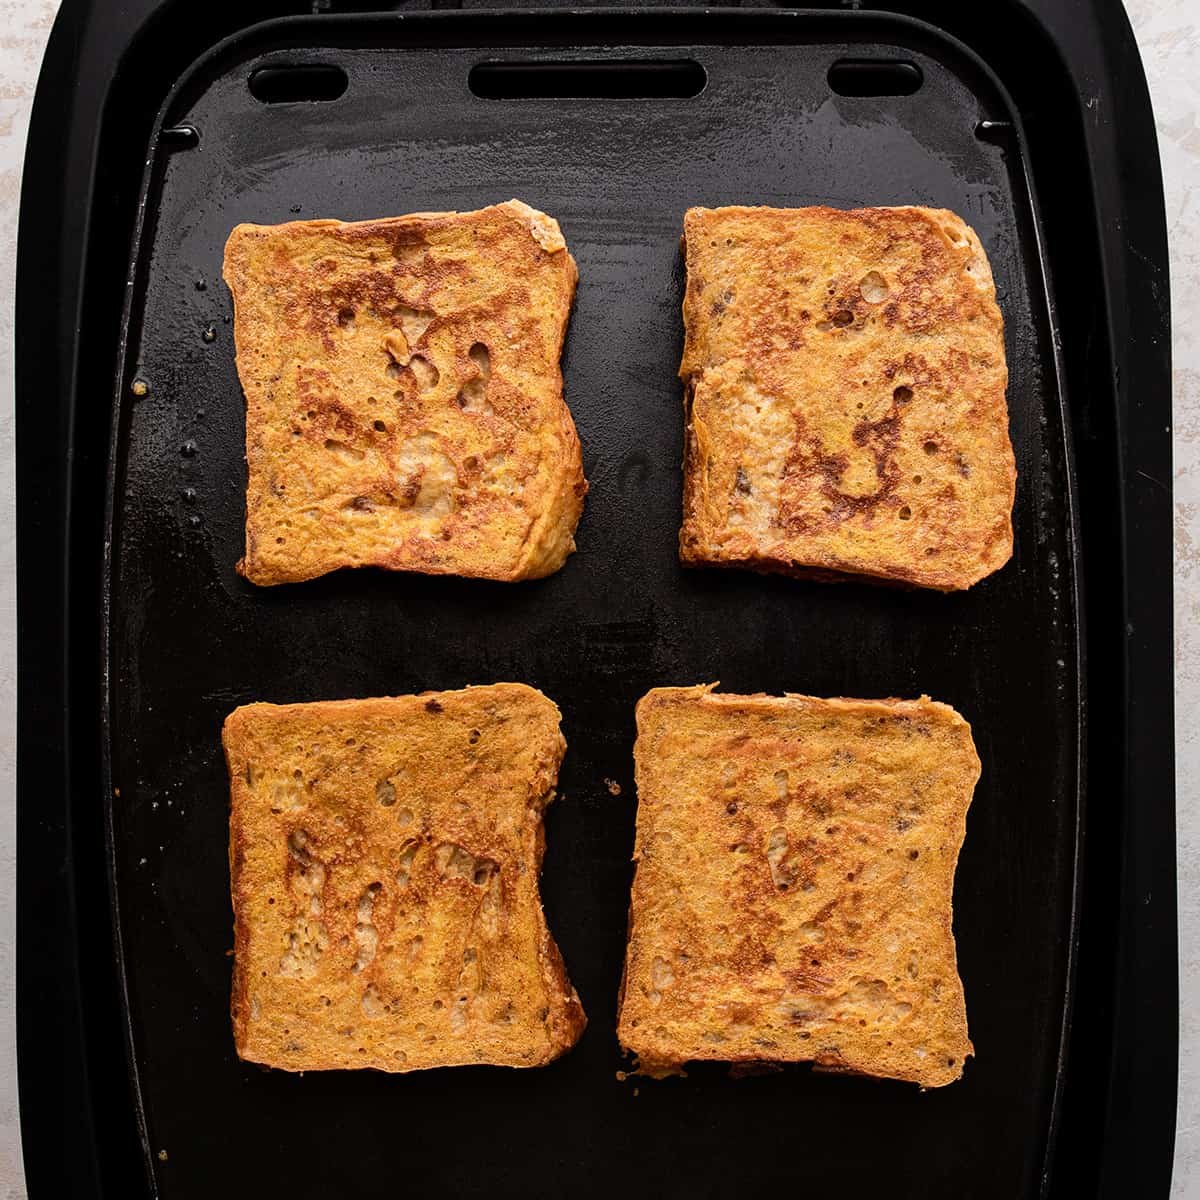 4 pieces of Pumpkin French Toast cooking on an electric griddle